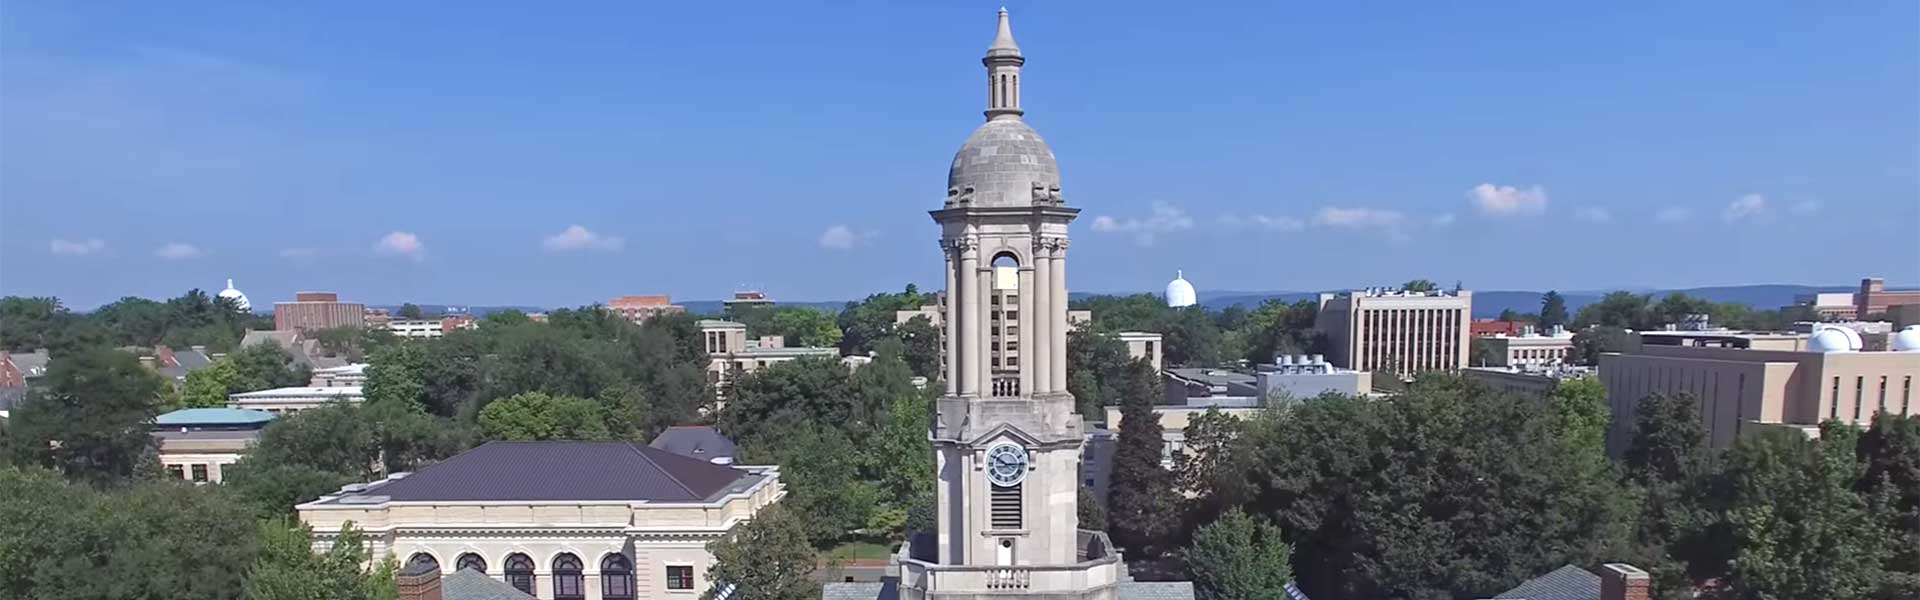 Old Main aerial view